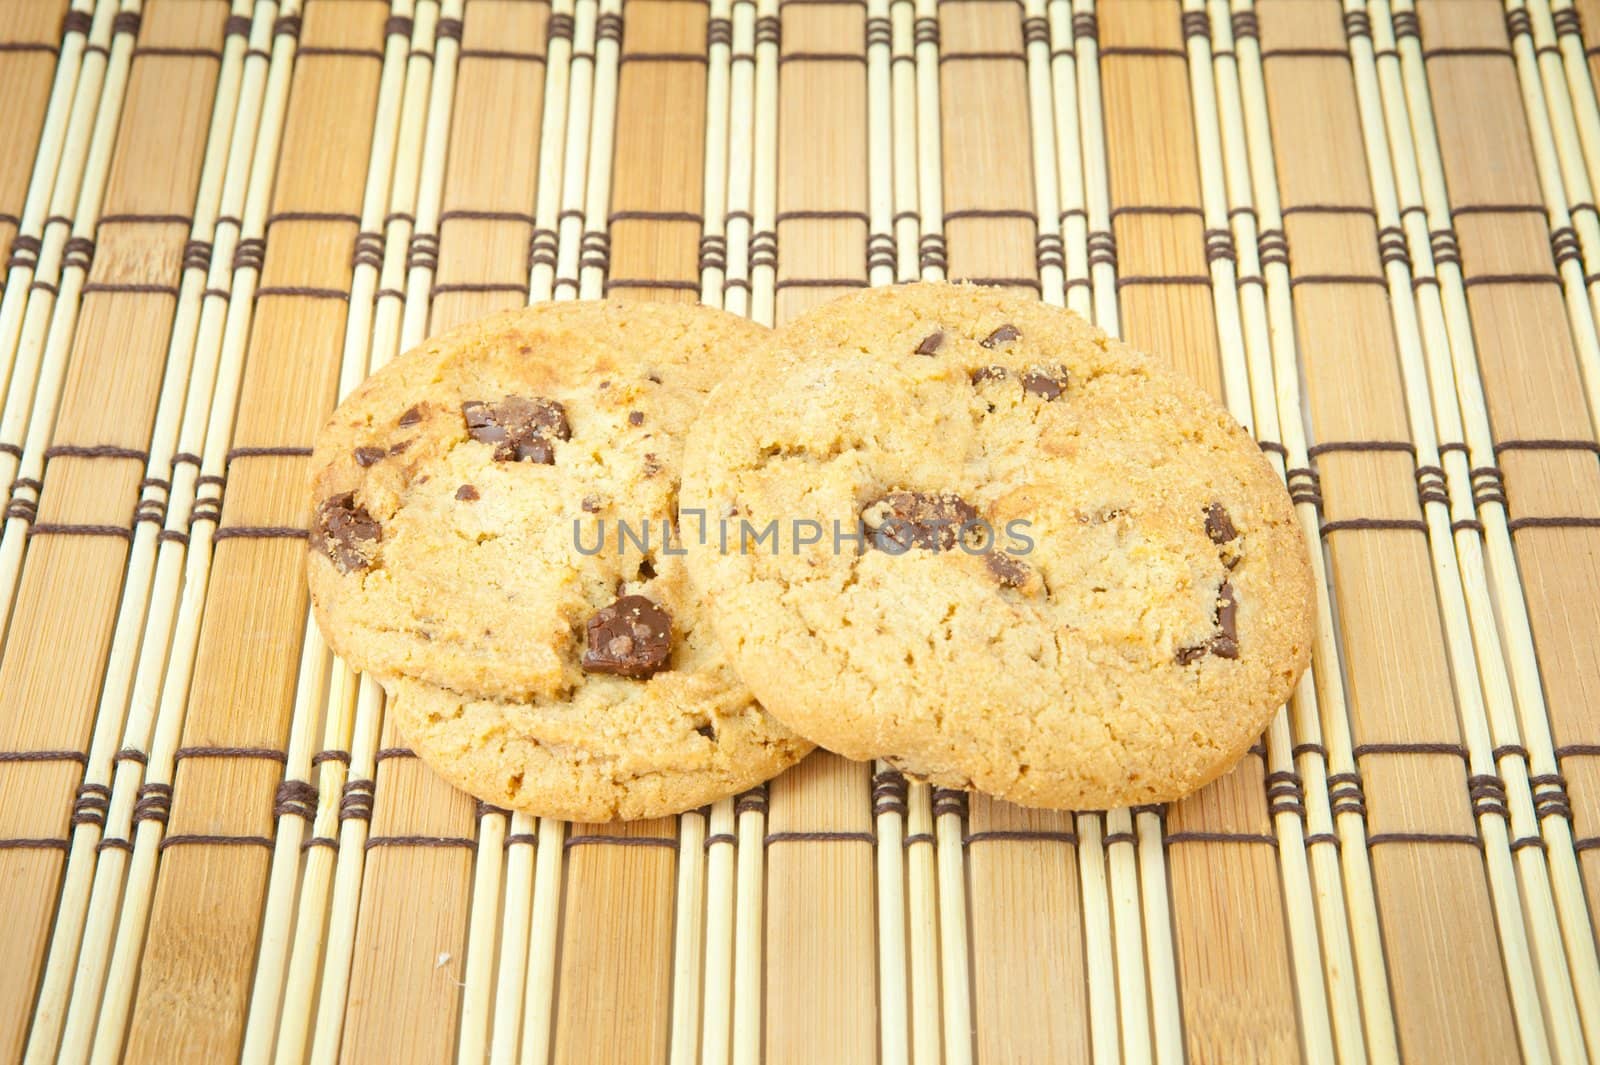 Chocolate chip cookies on wood background